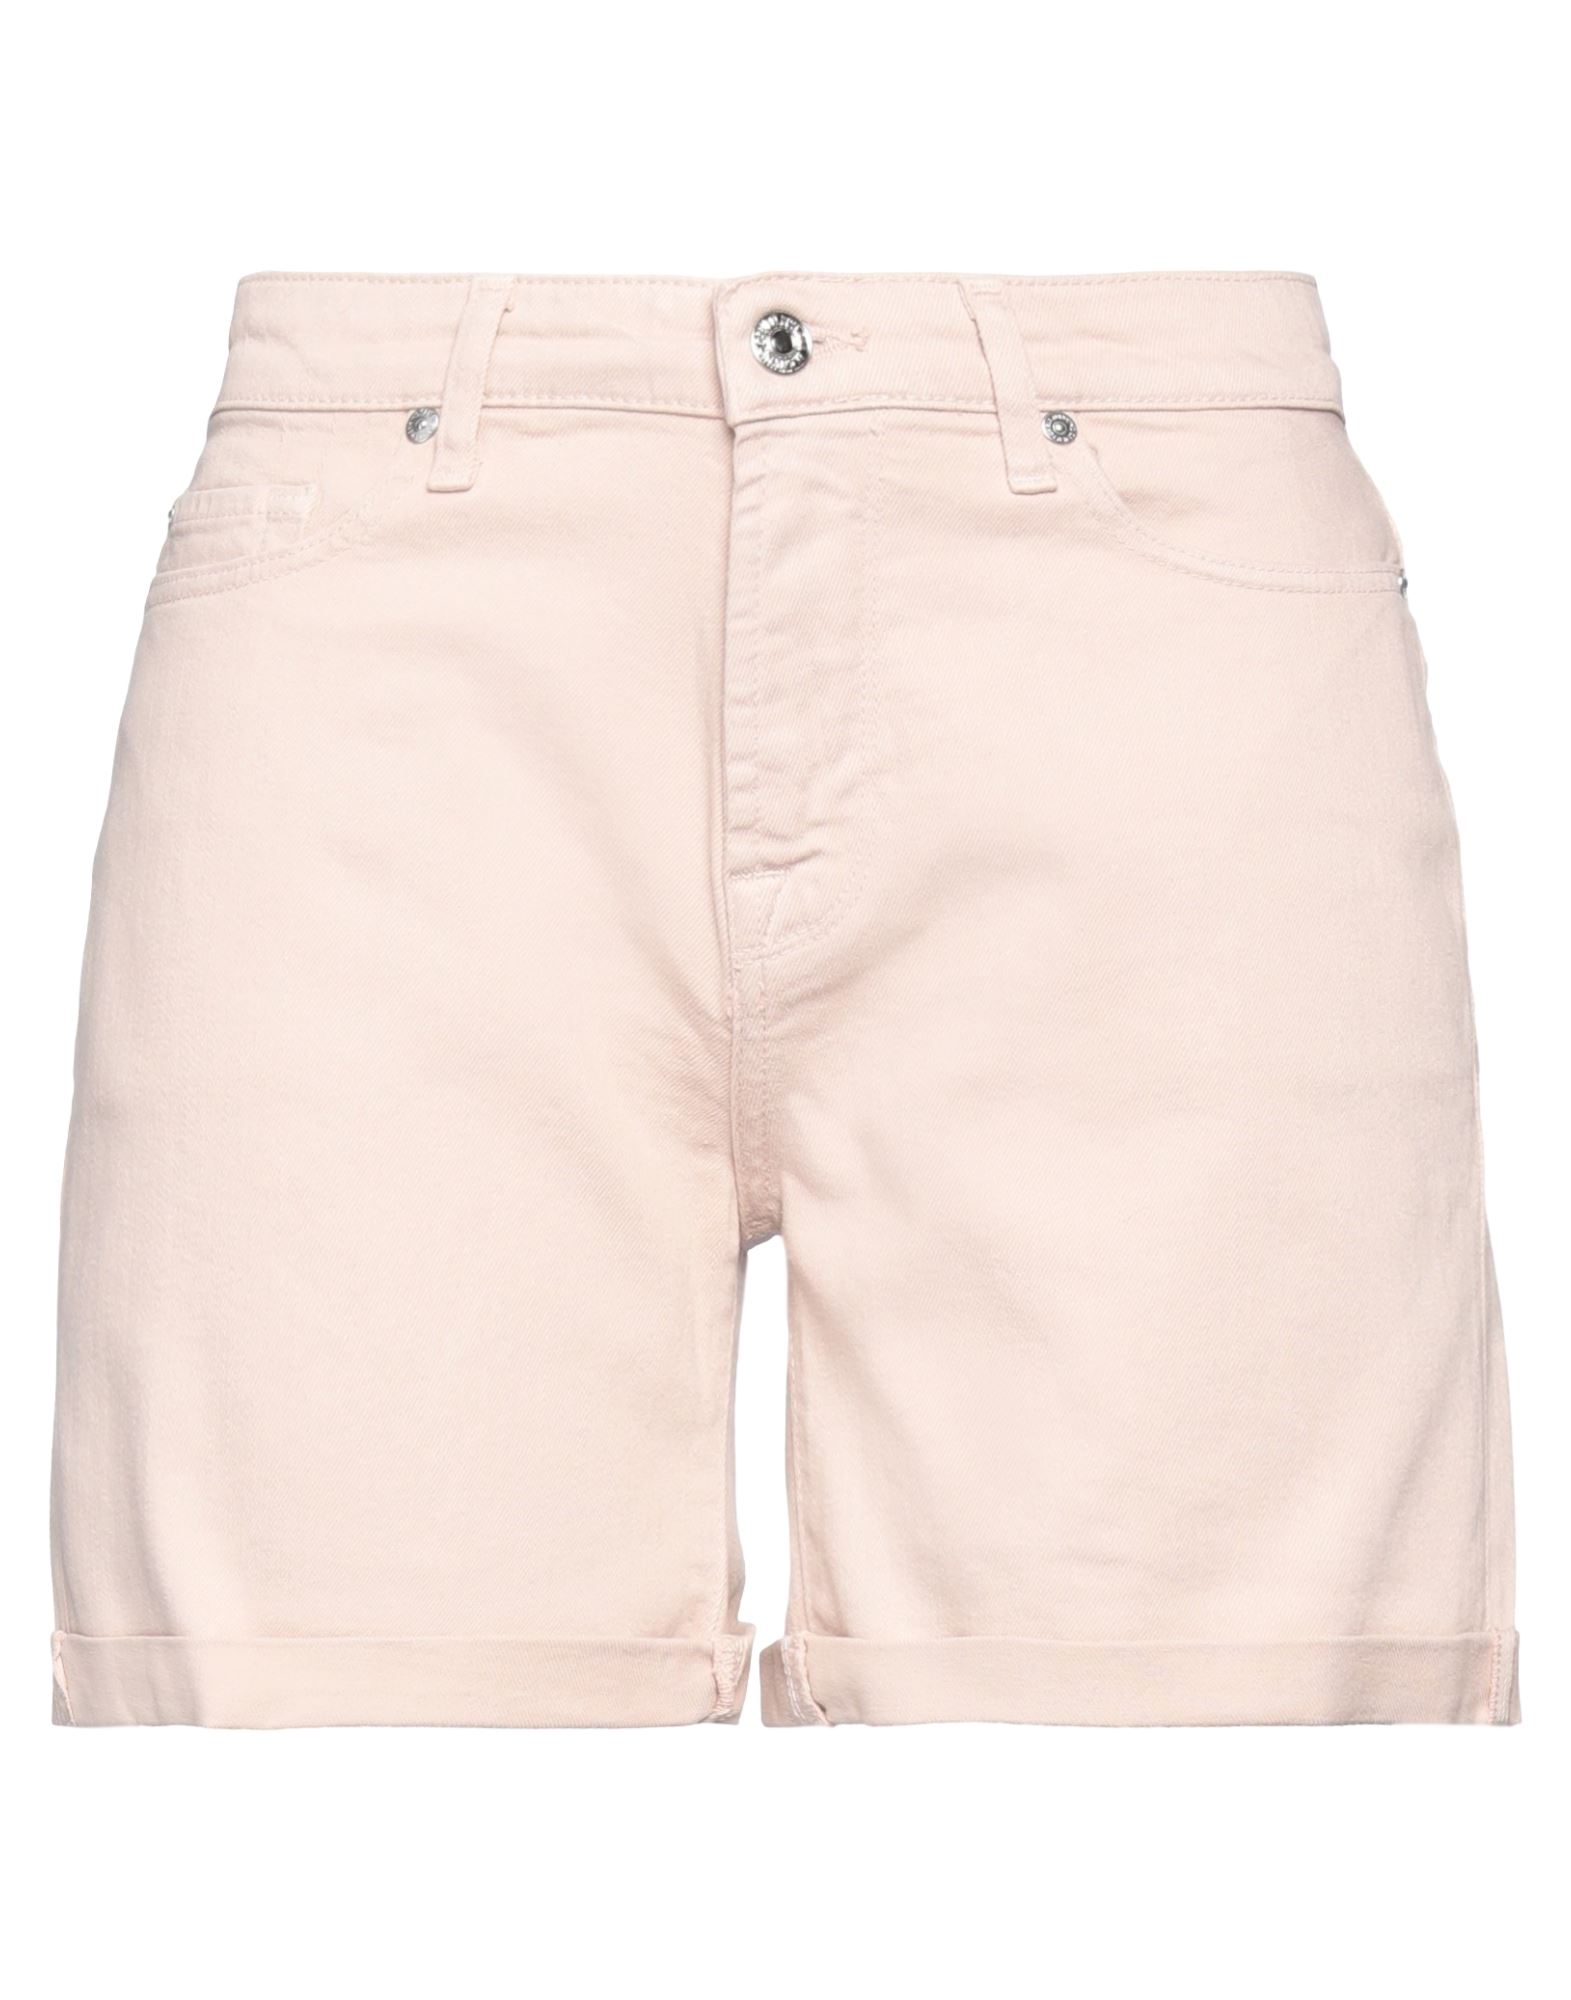 7 FOR ALL MANKIND Jeansshorts Damen Hellrosa von 7 FOR ALL MANKIND